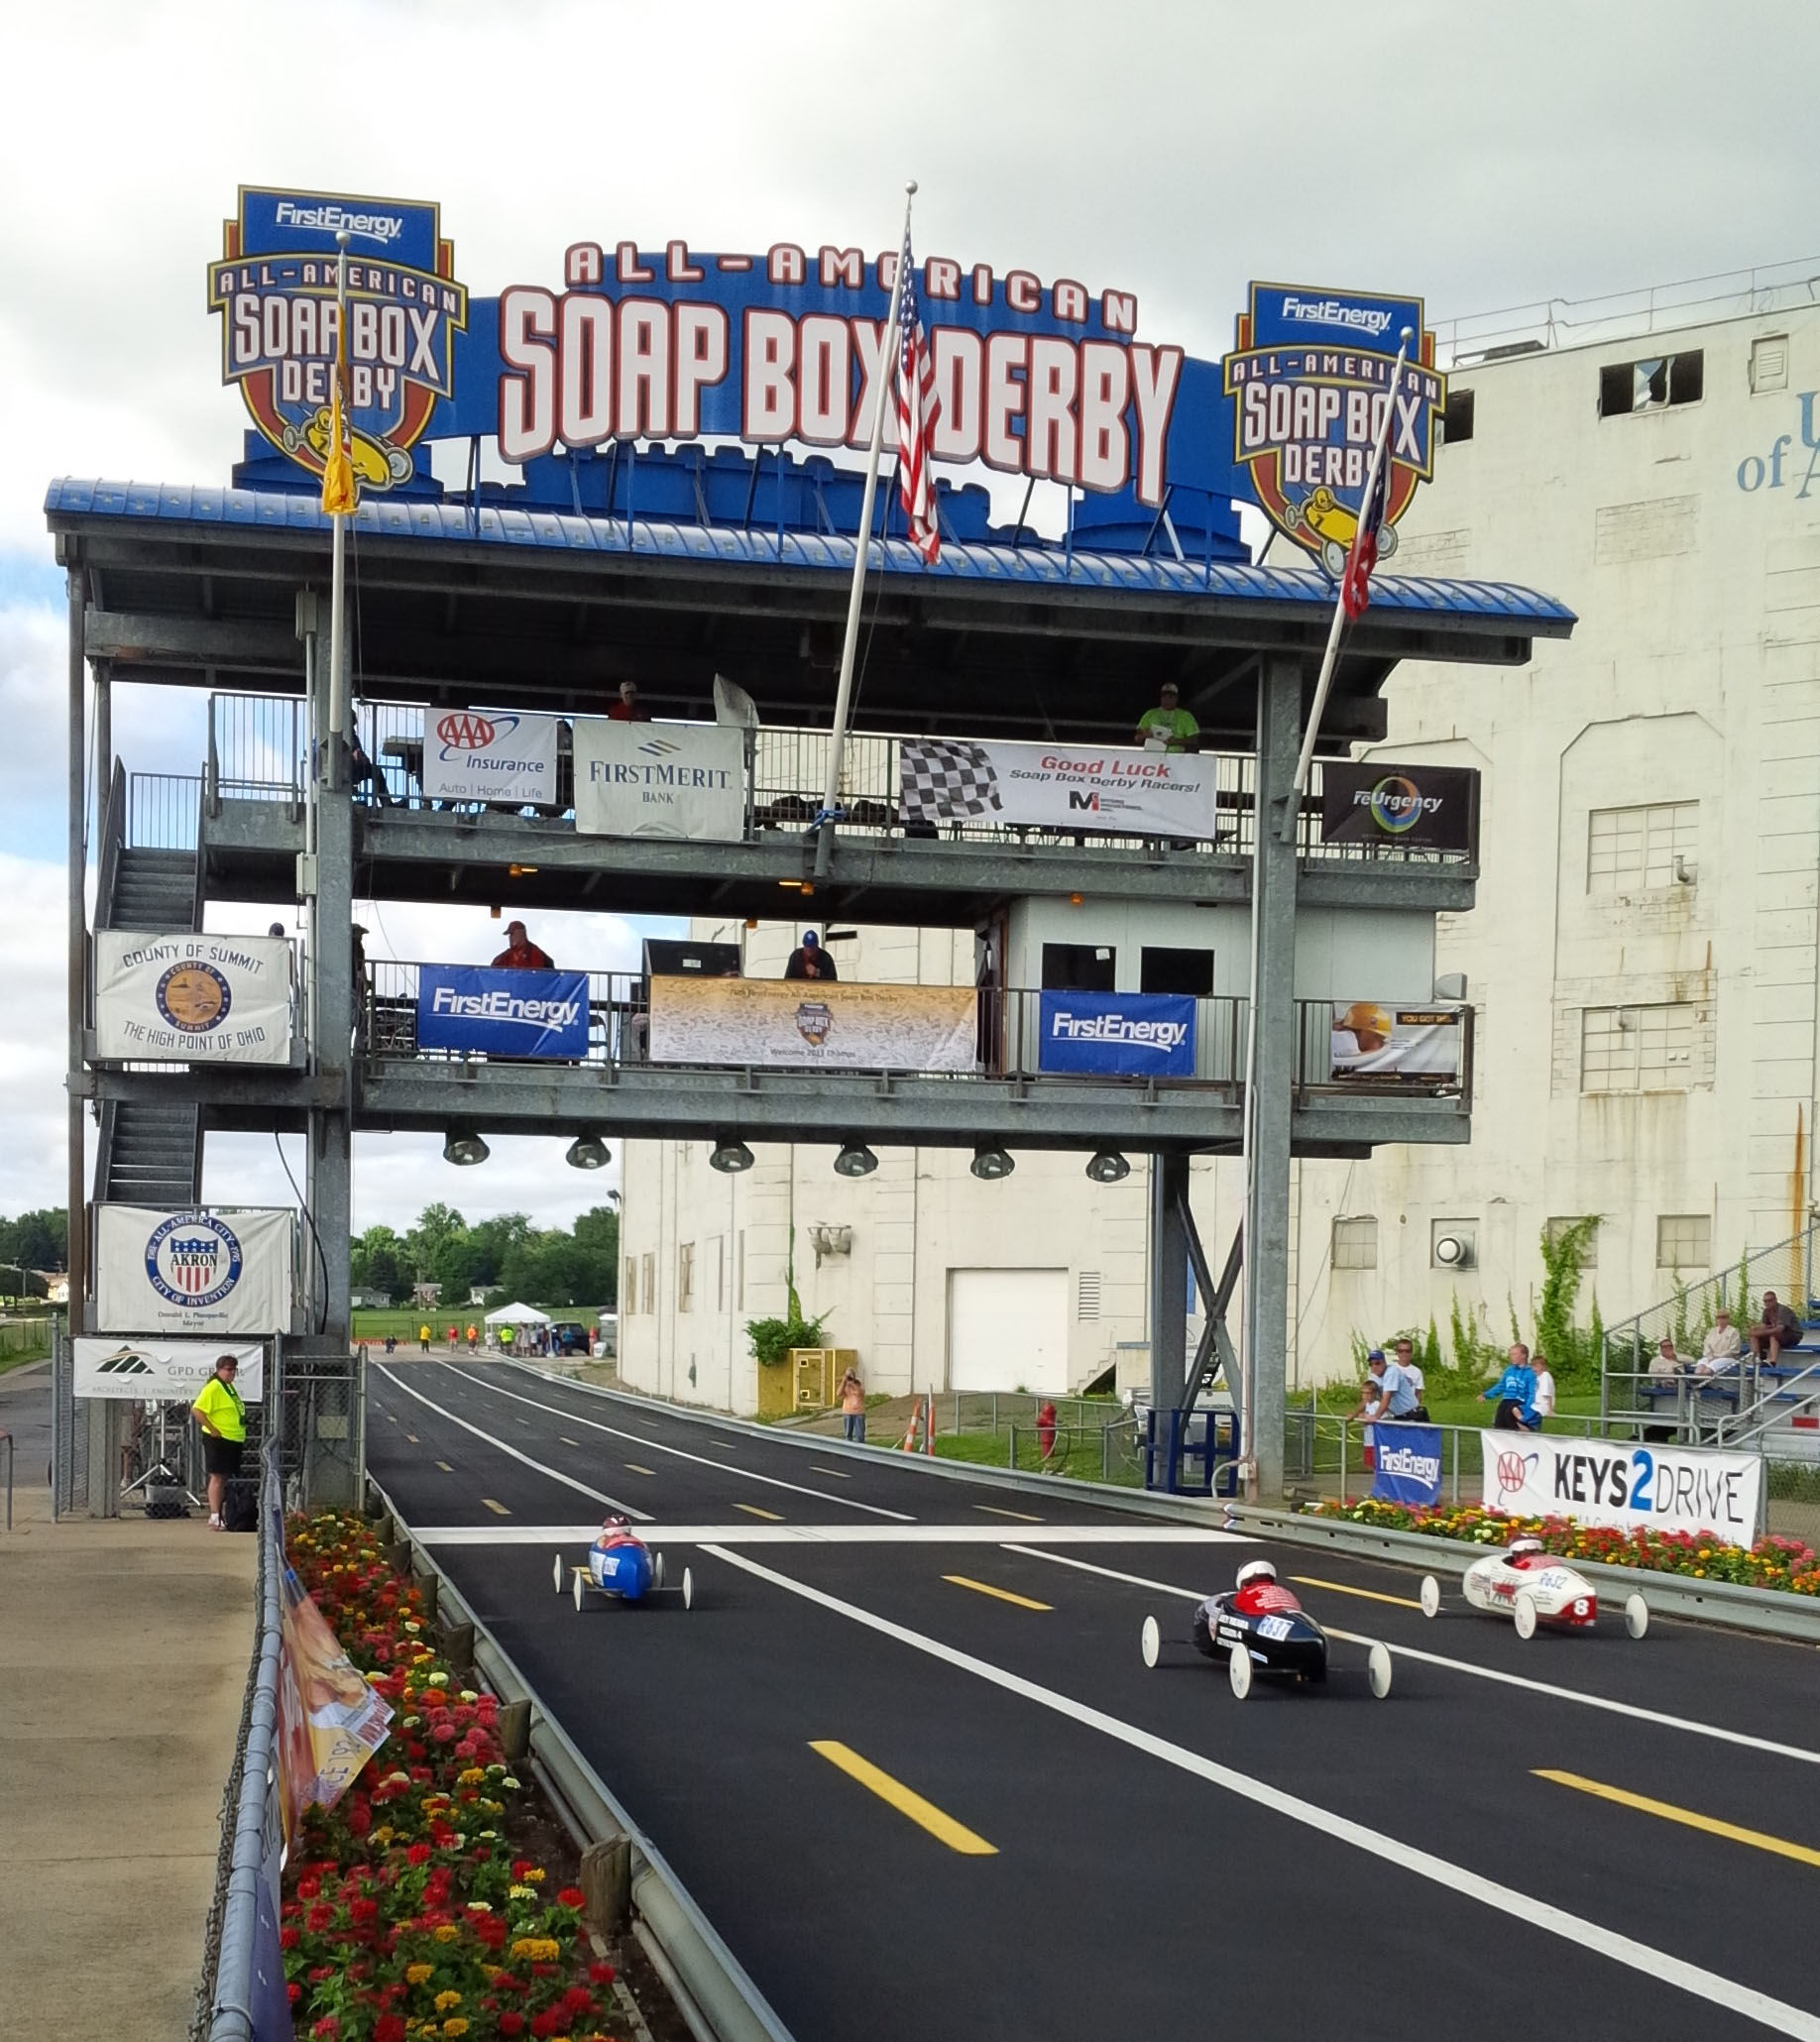 View of the Soap Box Derby Finish Line.